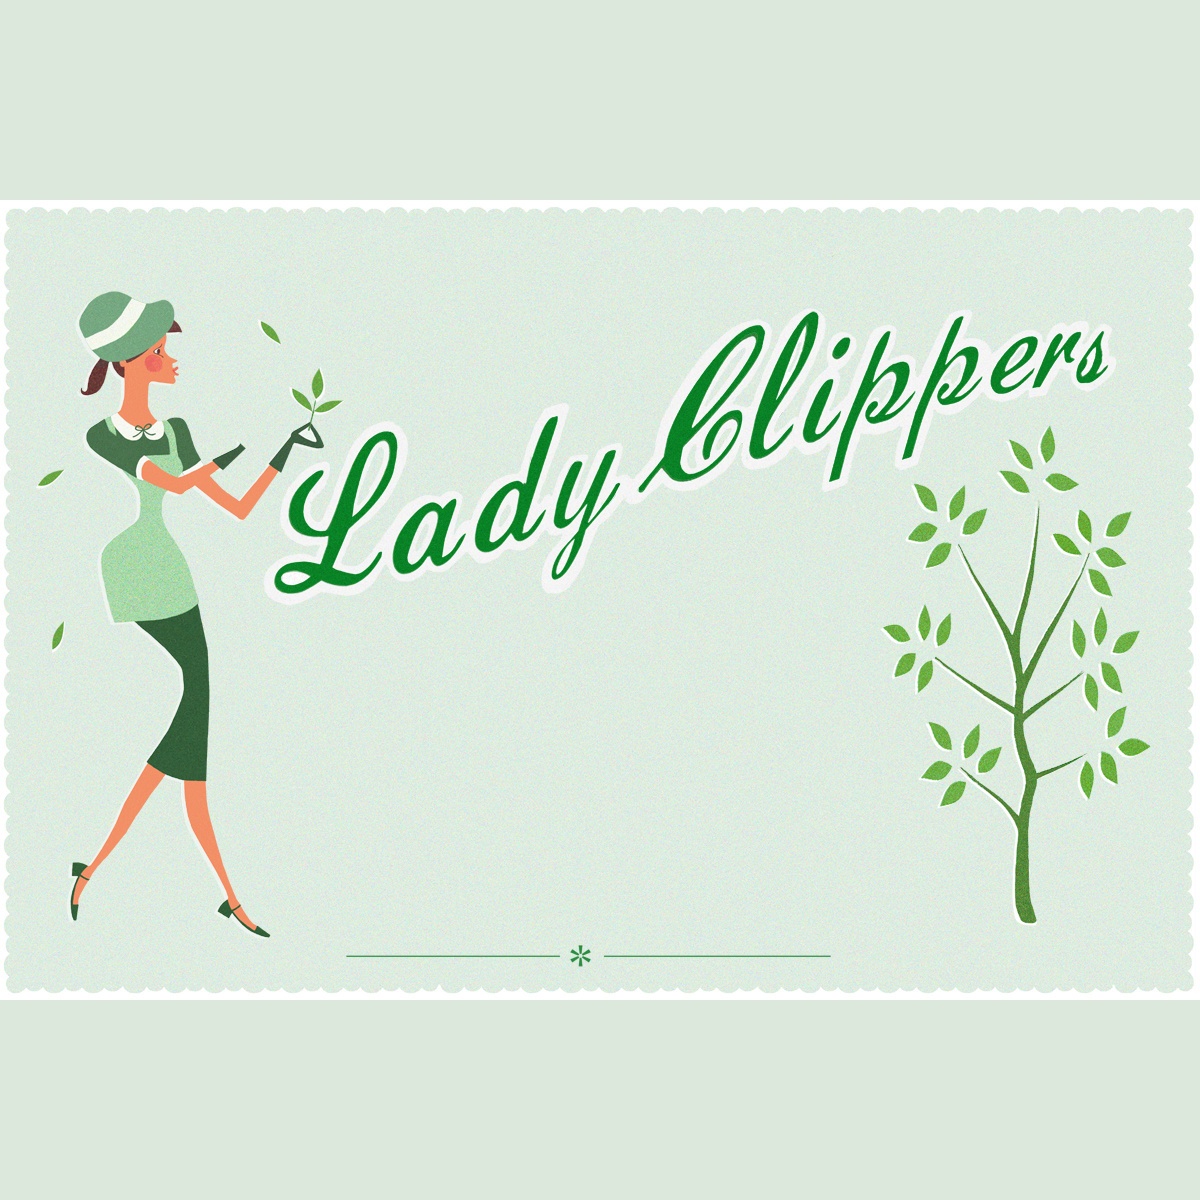 Lady Clippers, Inc.